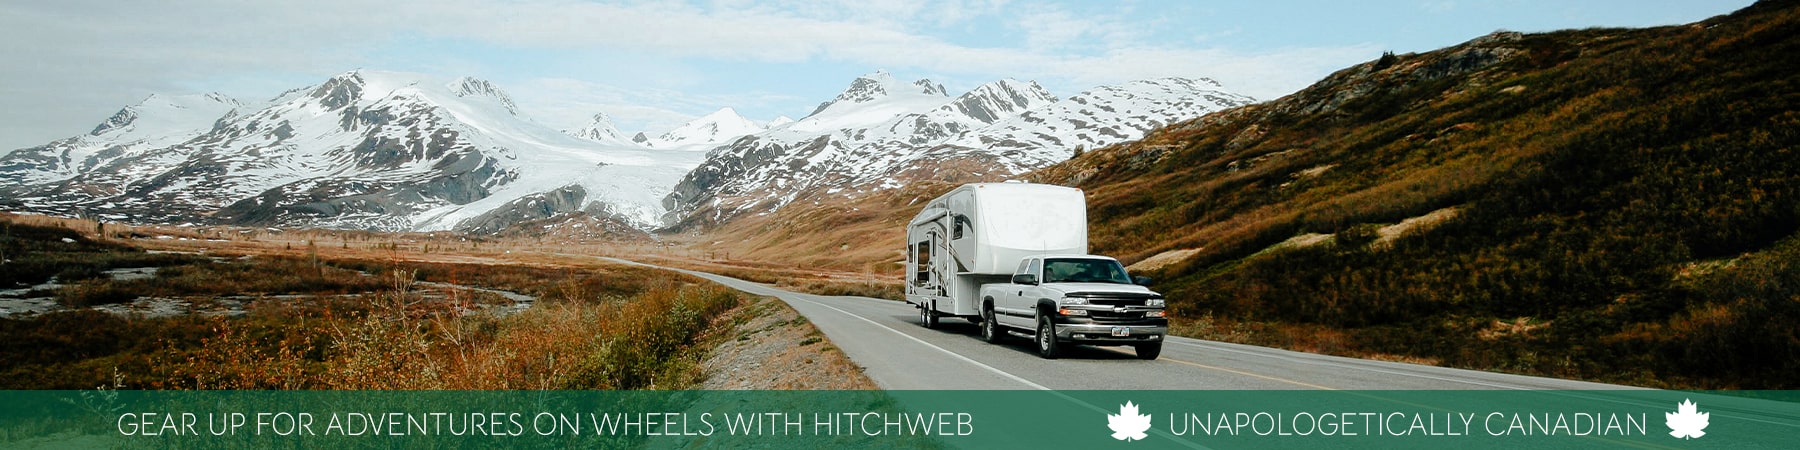 GEAR UP FOR ADVENTURE WITH HITCHWEB CANADA